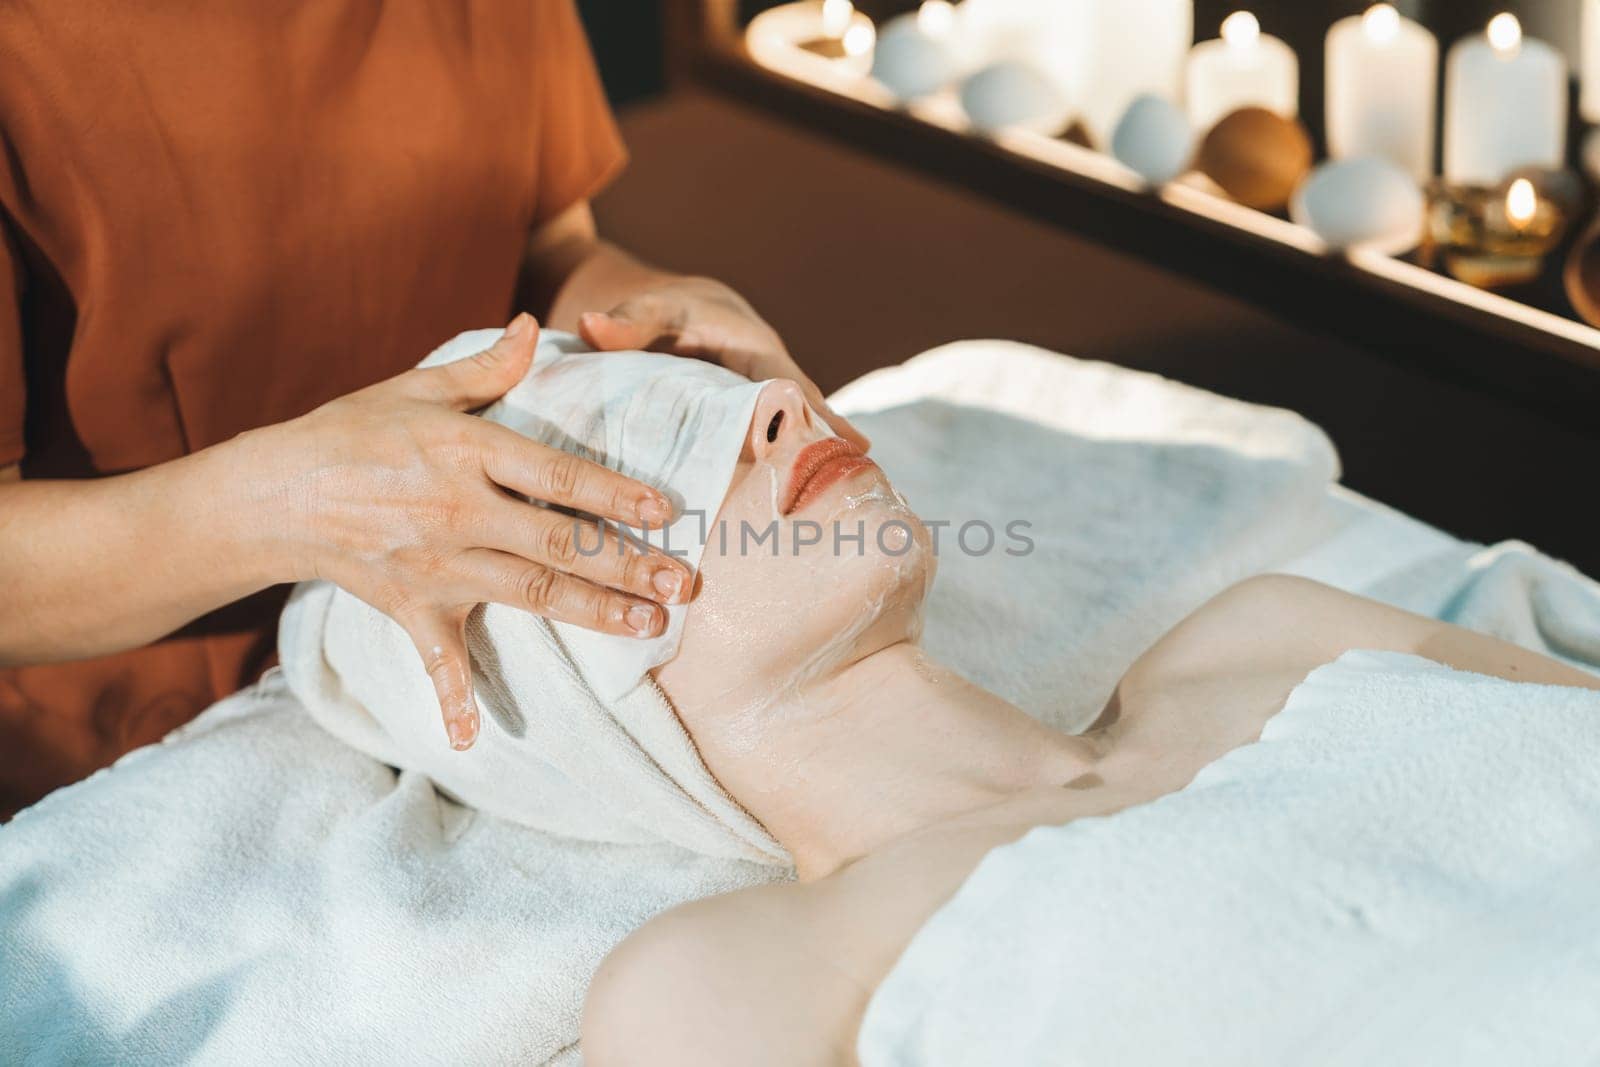 Beautiful woman having facial massage with facial mask at spa. Tranquility by biancoblue